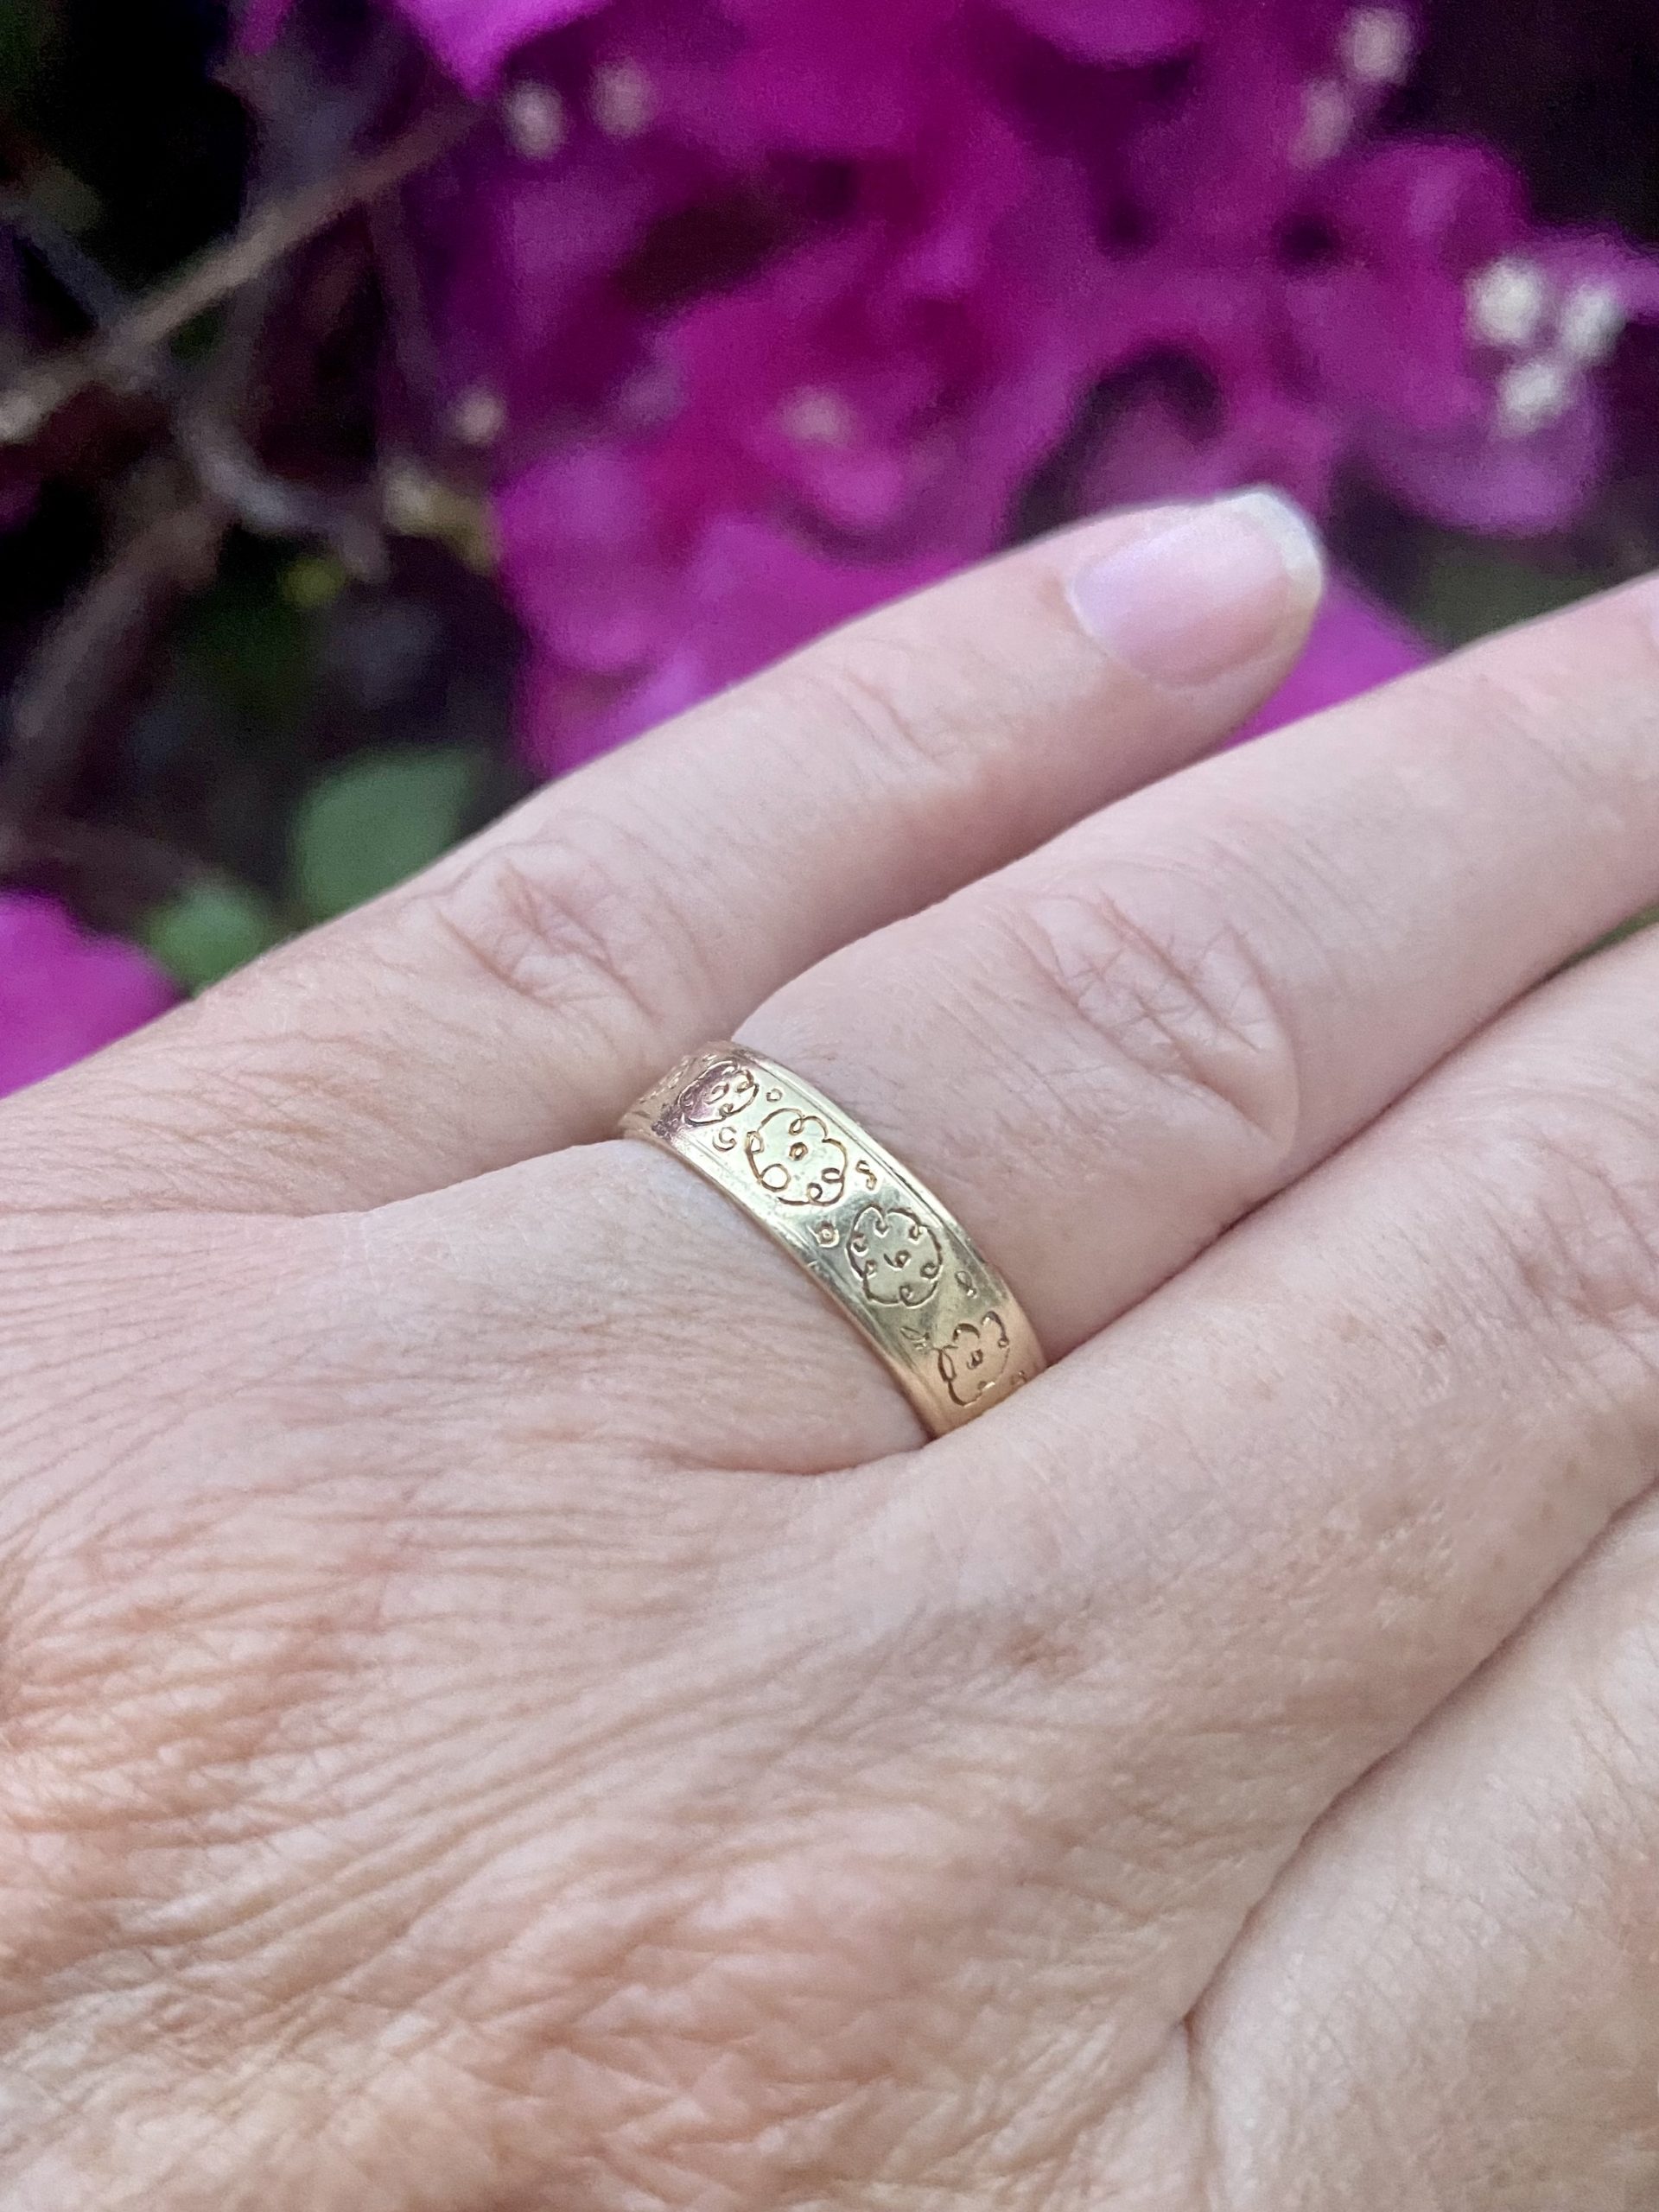 Making a Ring From Your Gold – Finding Gold in Colorado